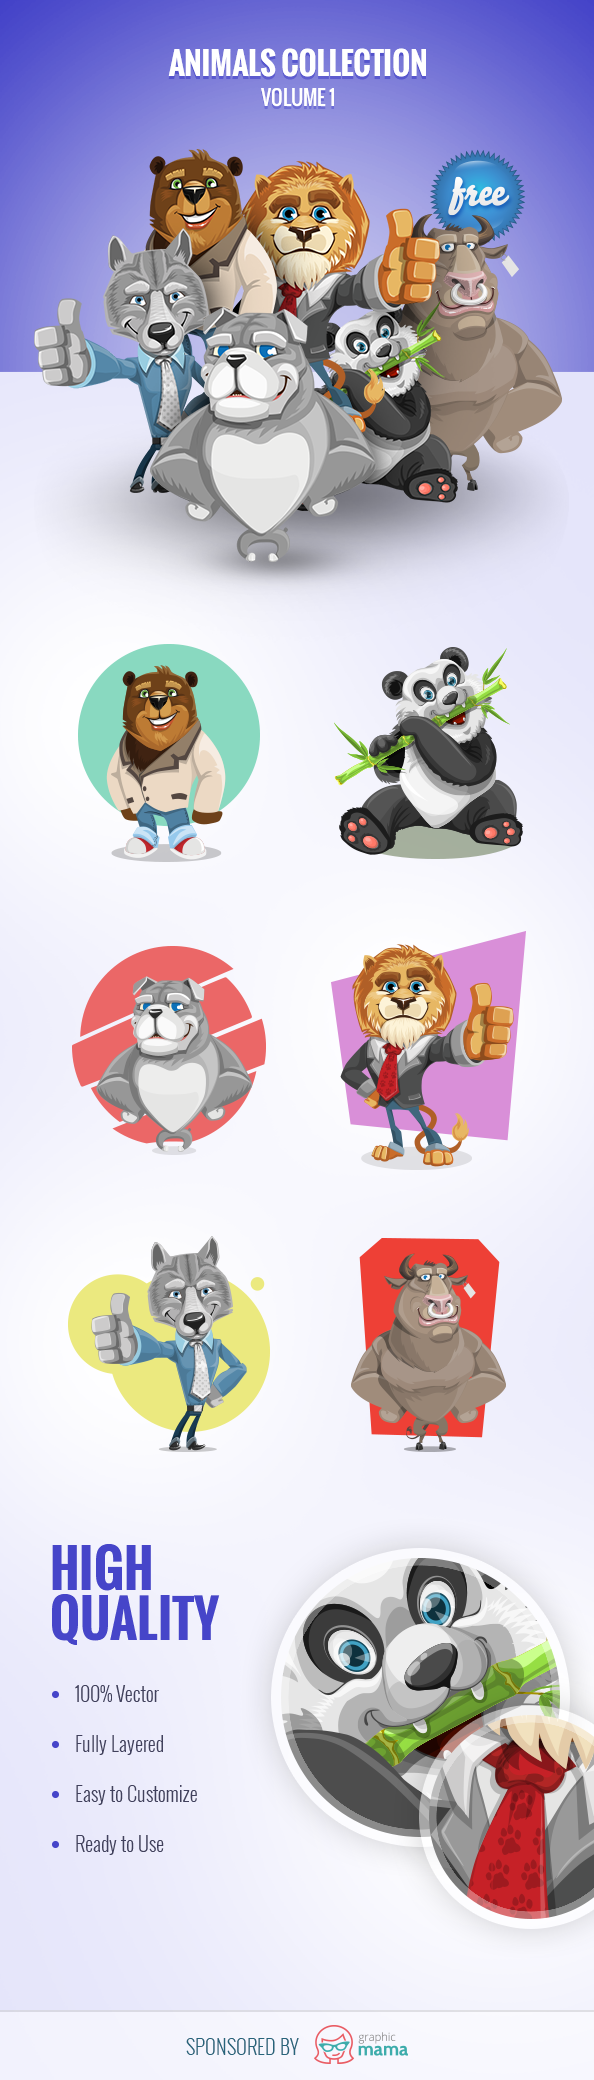 Free_Vector_Animal_Characters